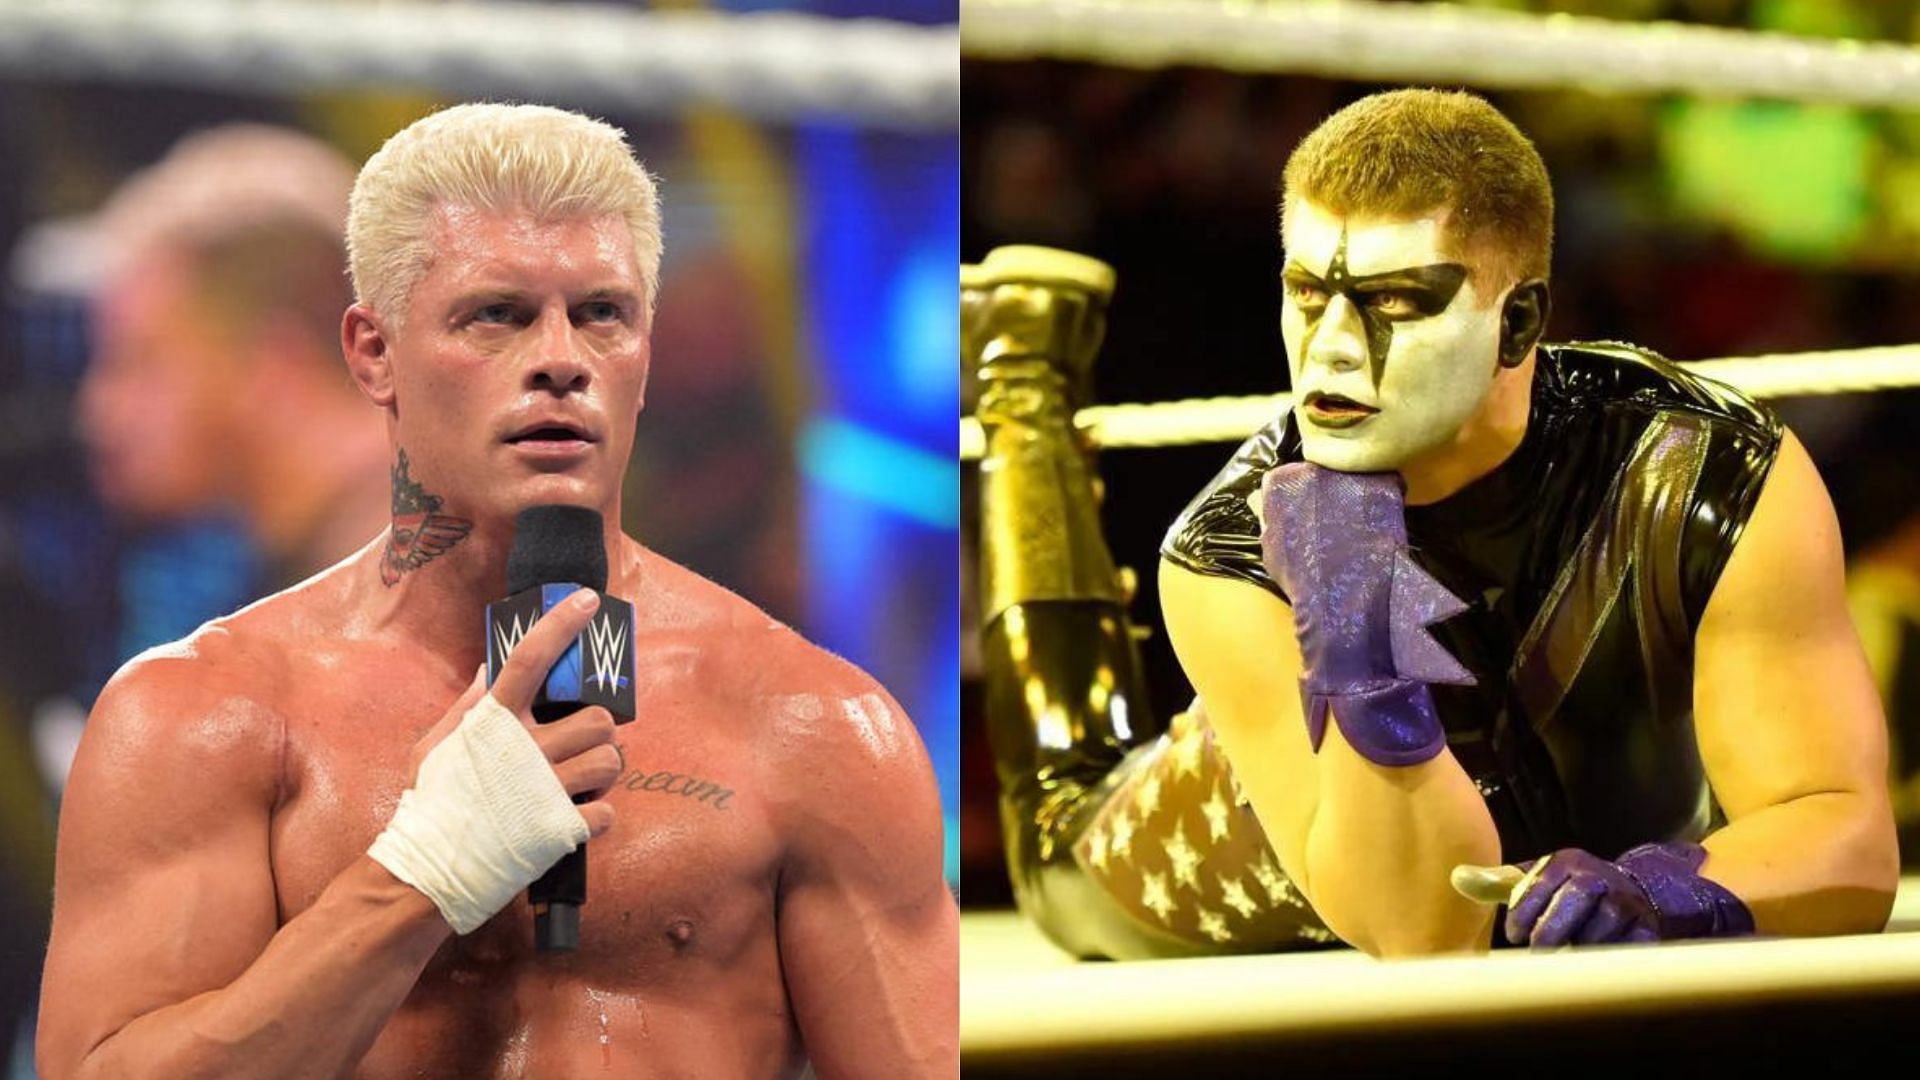 Cody Rhodes was Stardust during his previous run in WWE